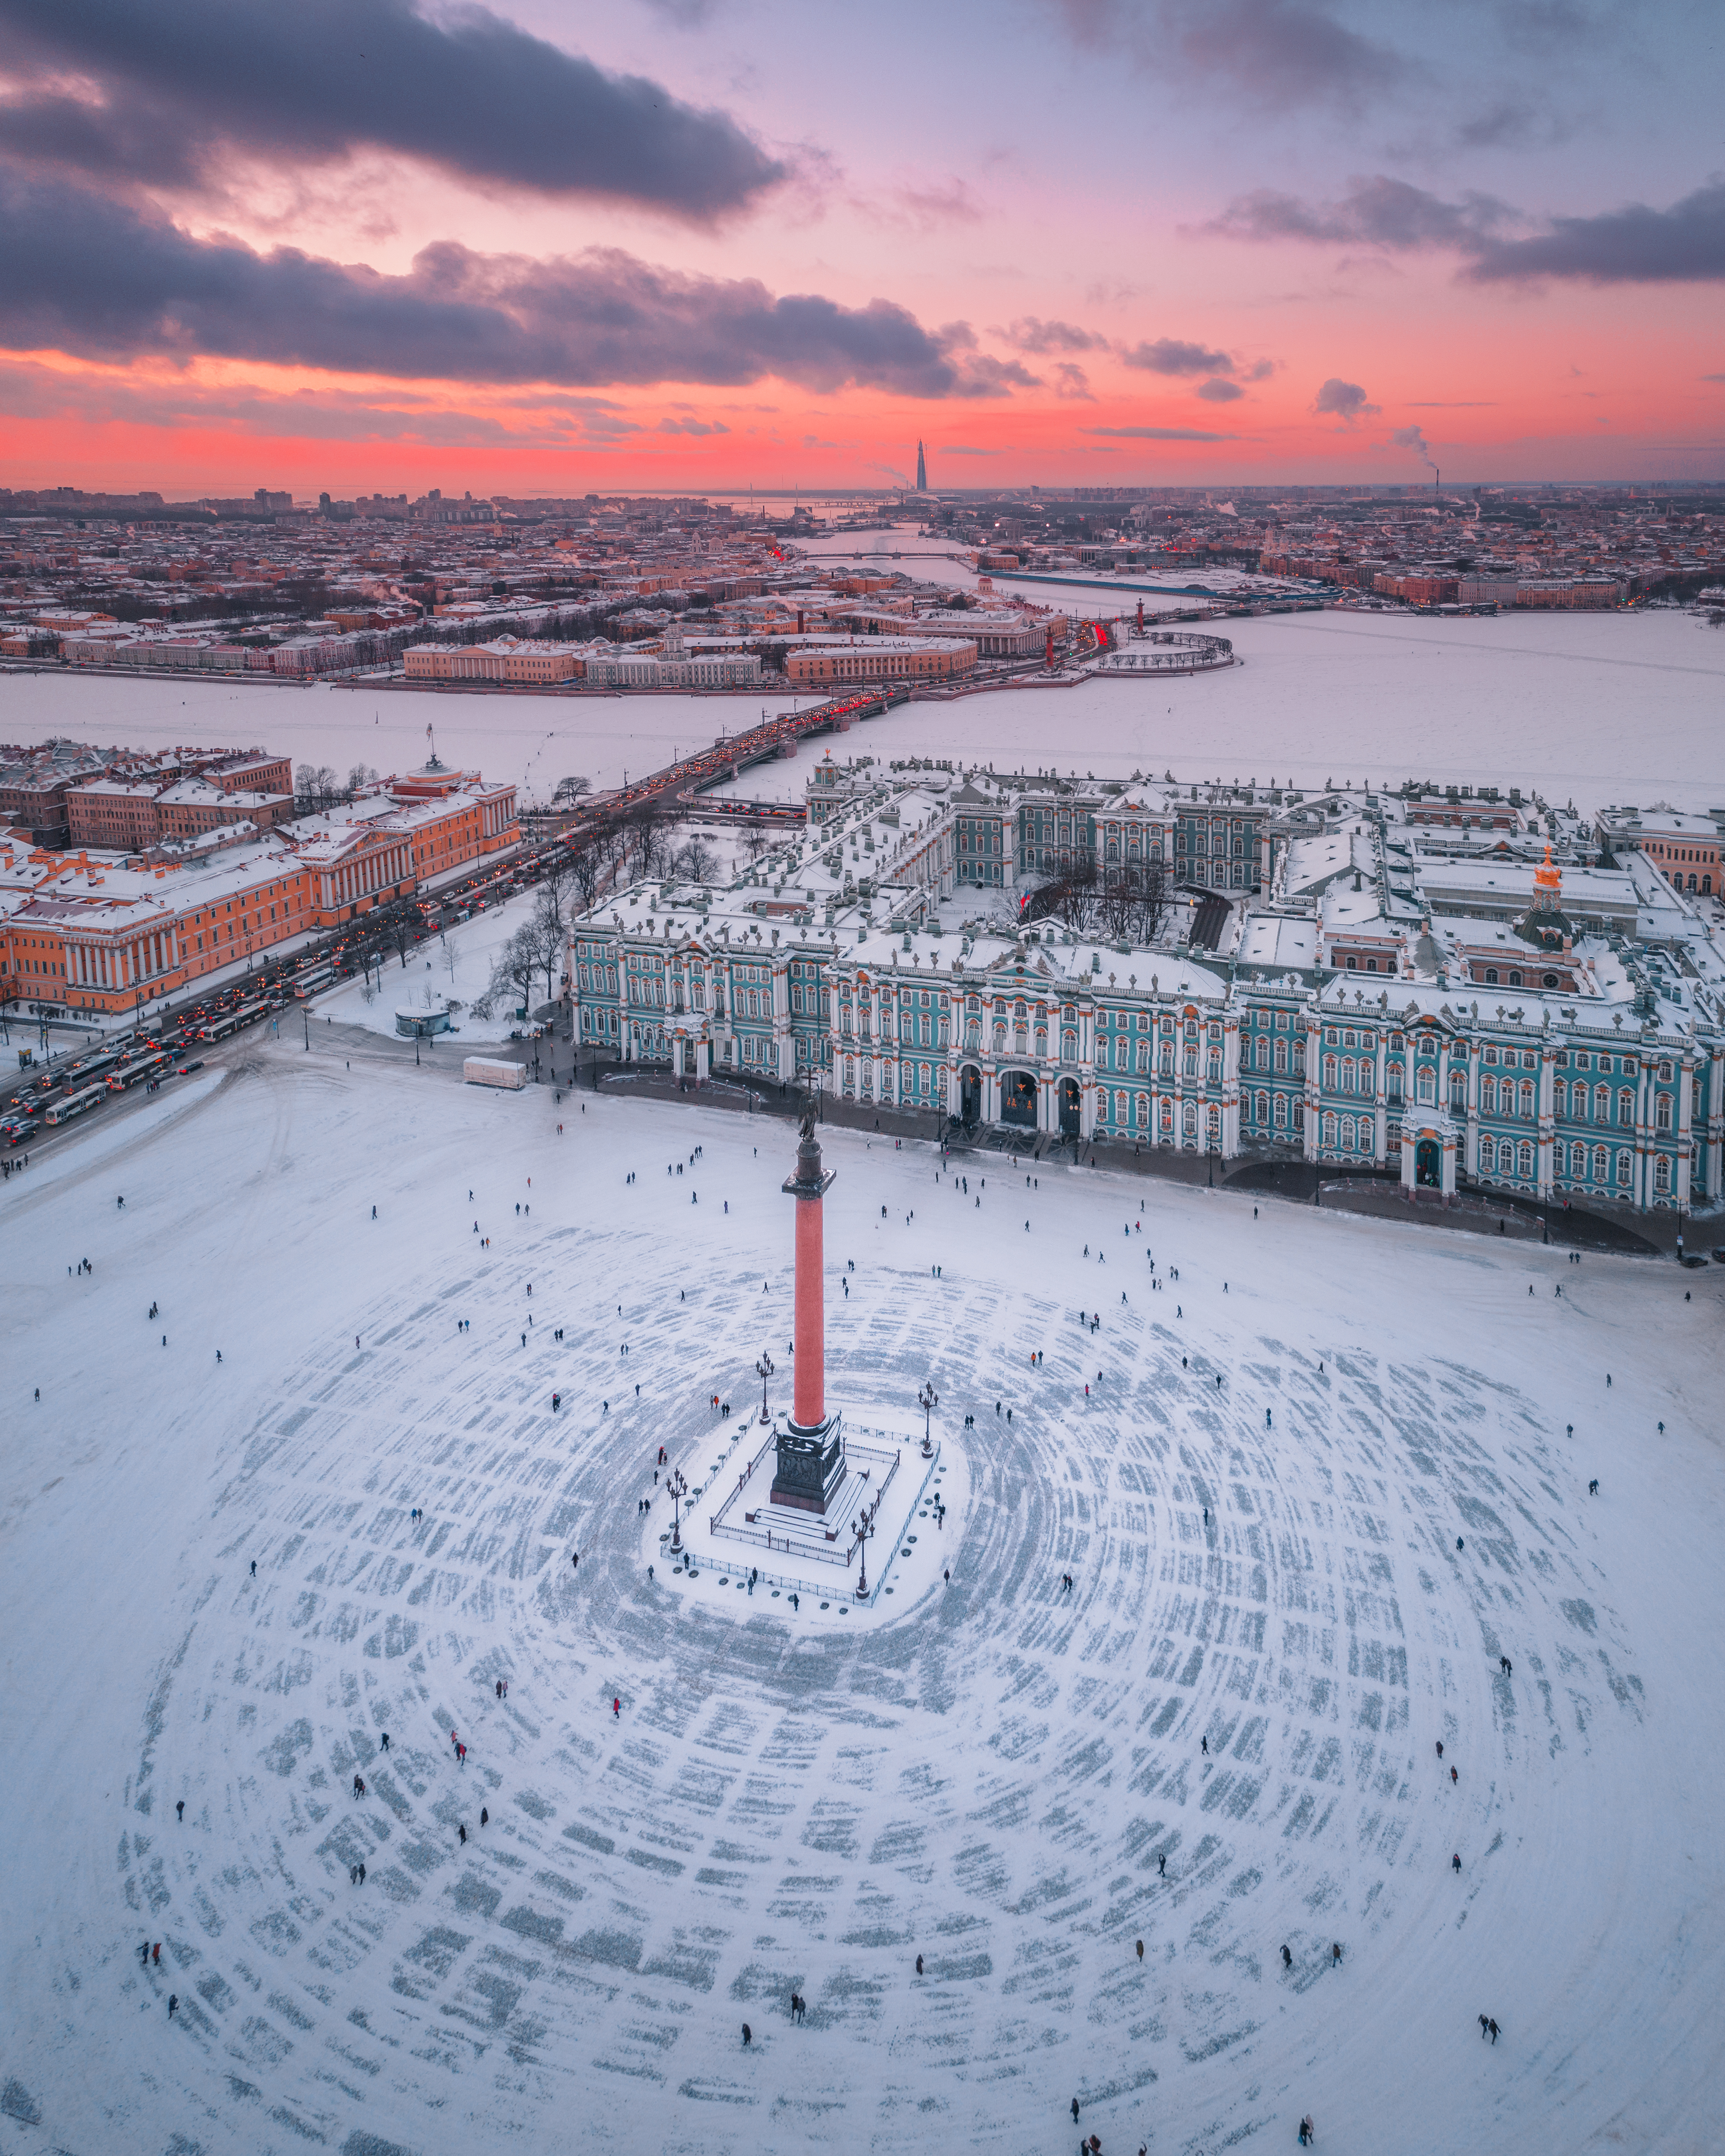 Over a million people visited St. Petersburg during the New Year holidays